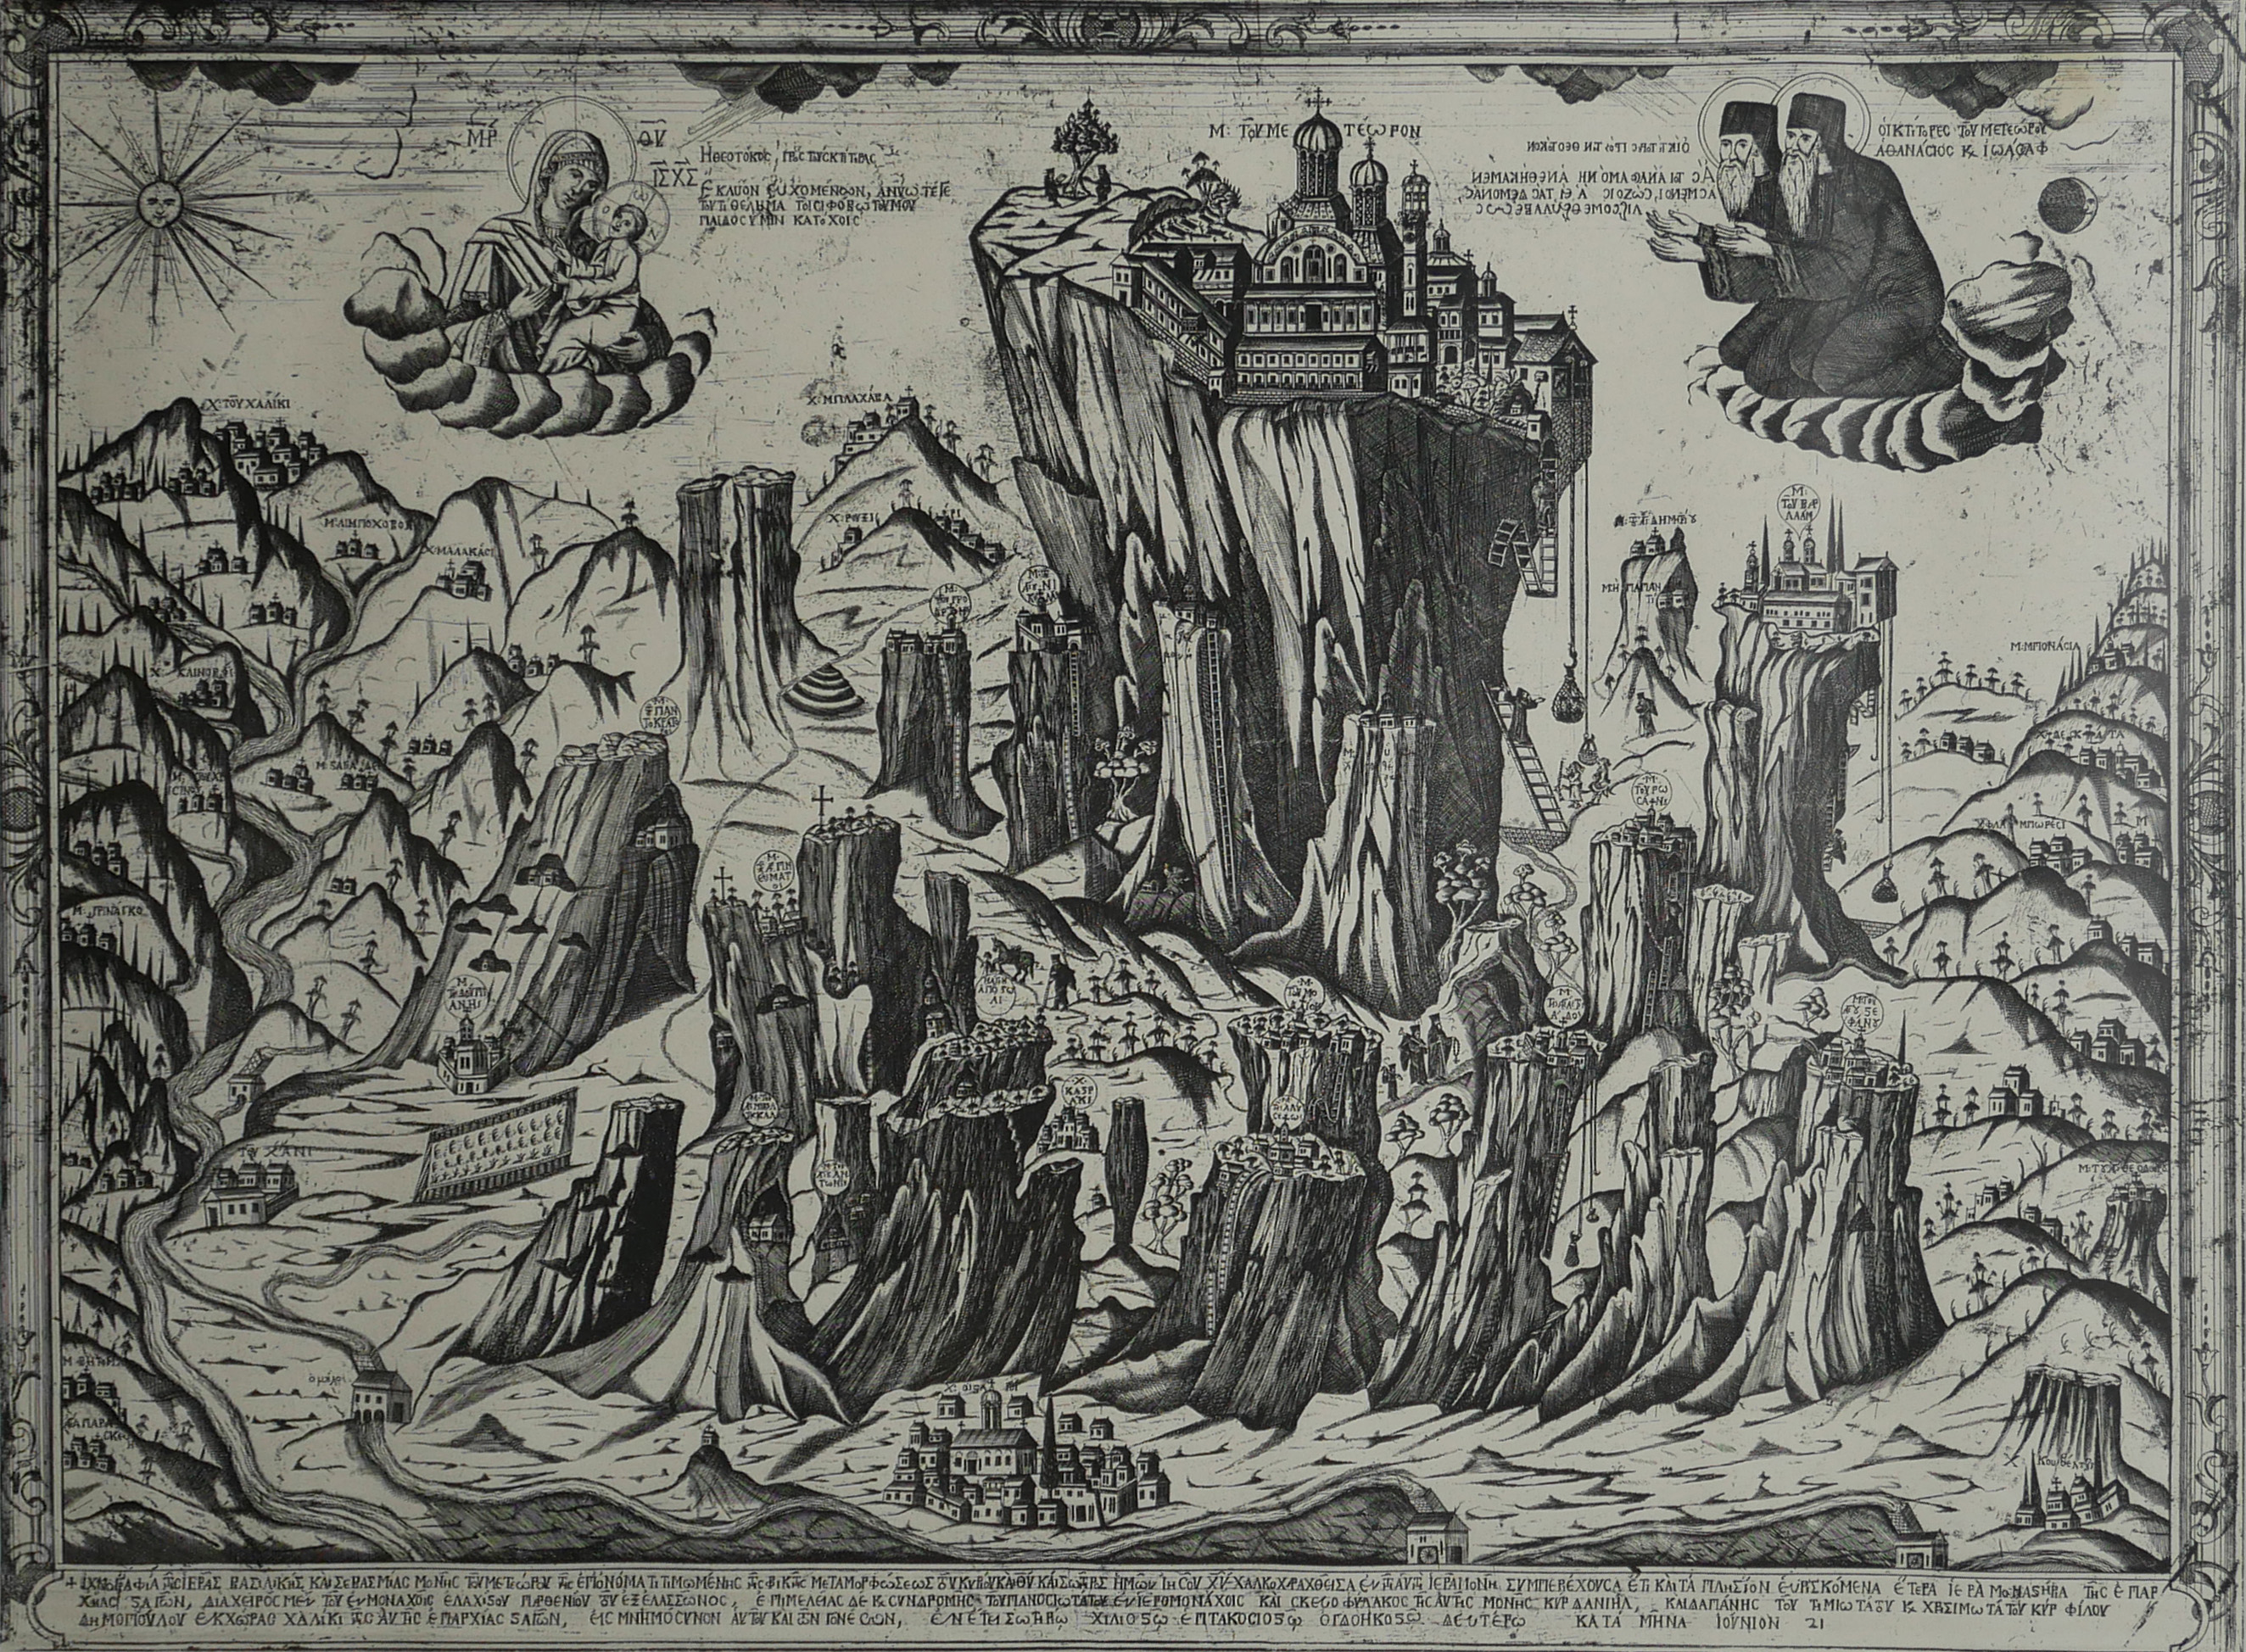 AFTER PRIEST-MONK PARTHENIOS, A GREEK BLACK AND WHITE LANDSCAPE ENGRAVING Panoramic view of